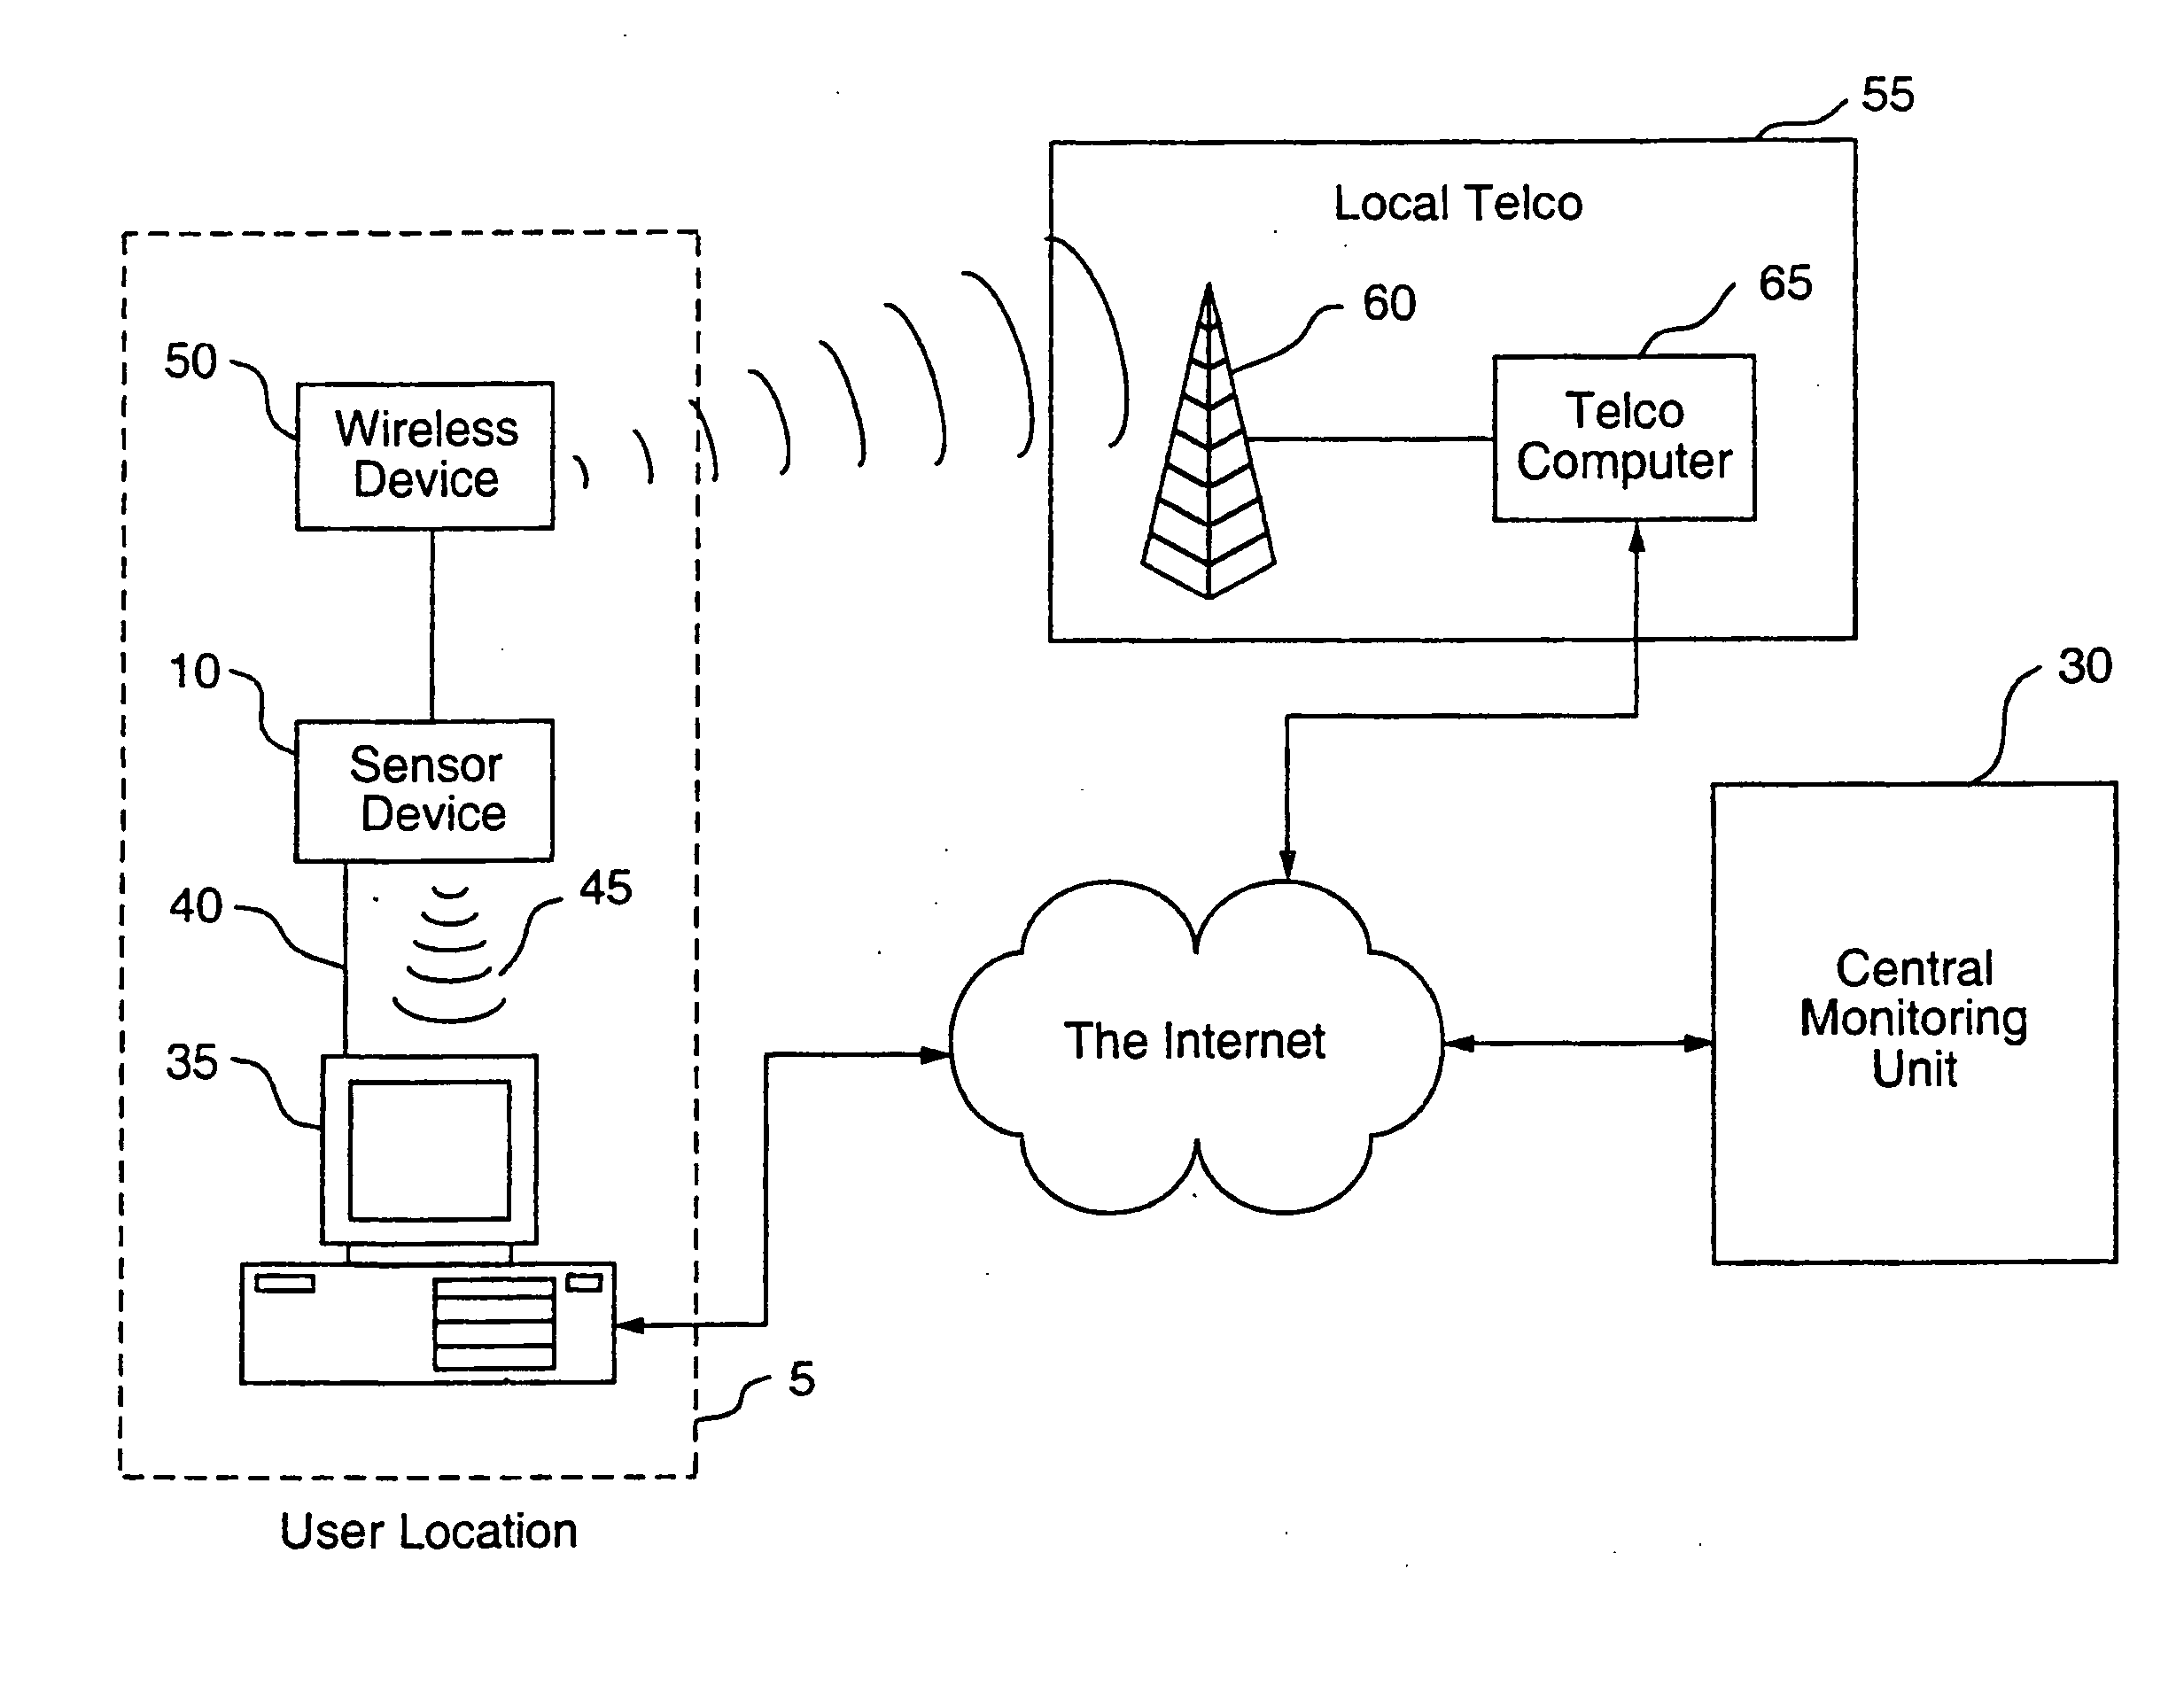 Apparatus for monitoring health, wellness and fitness